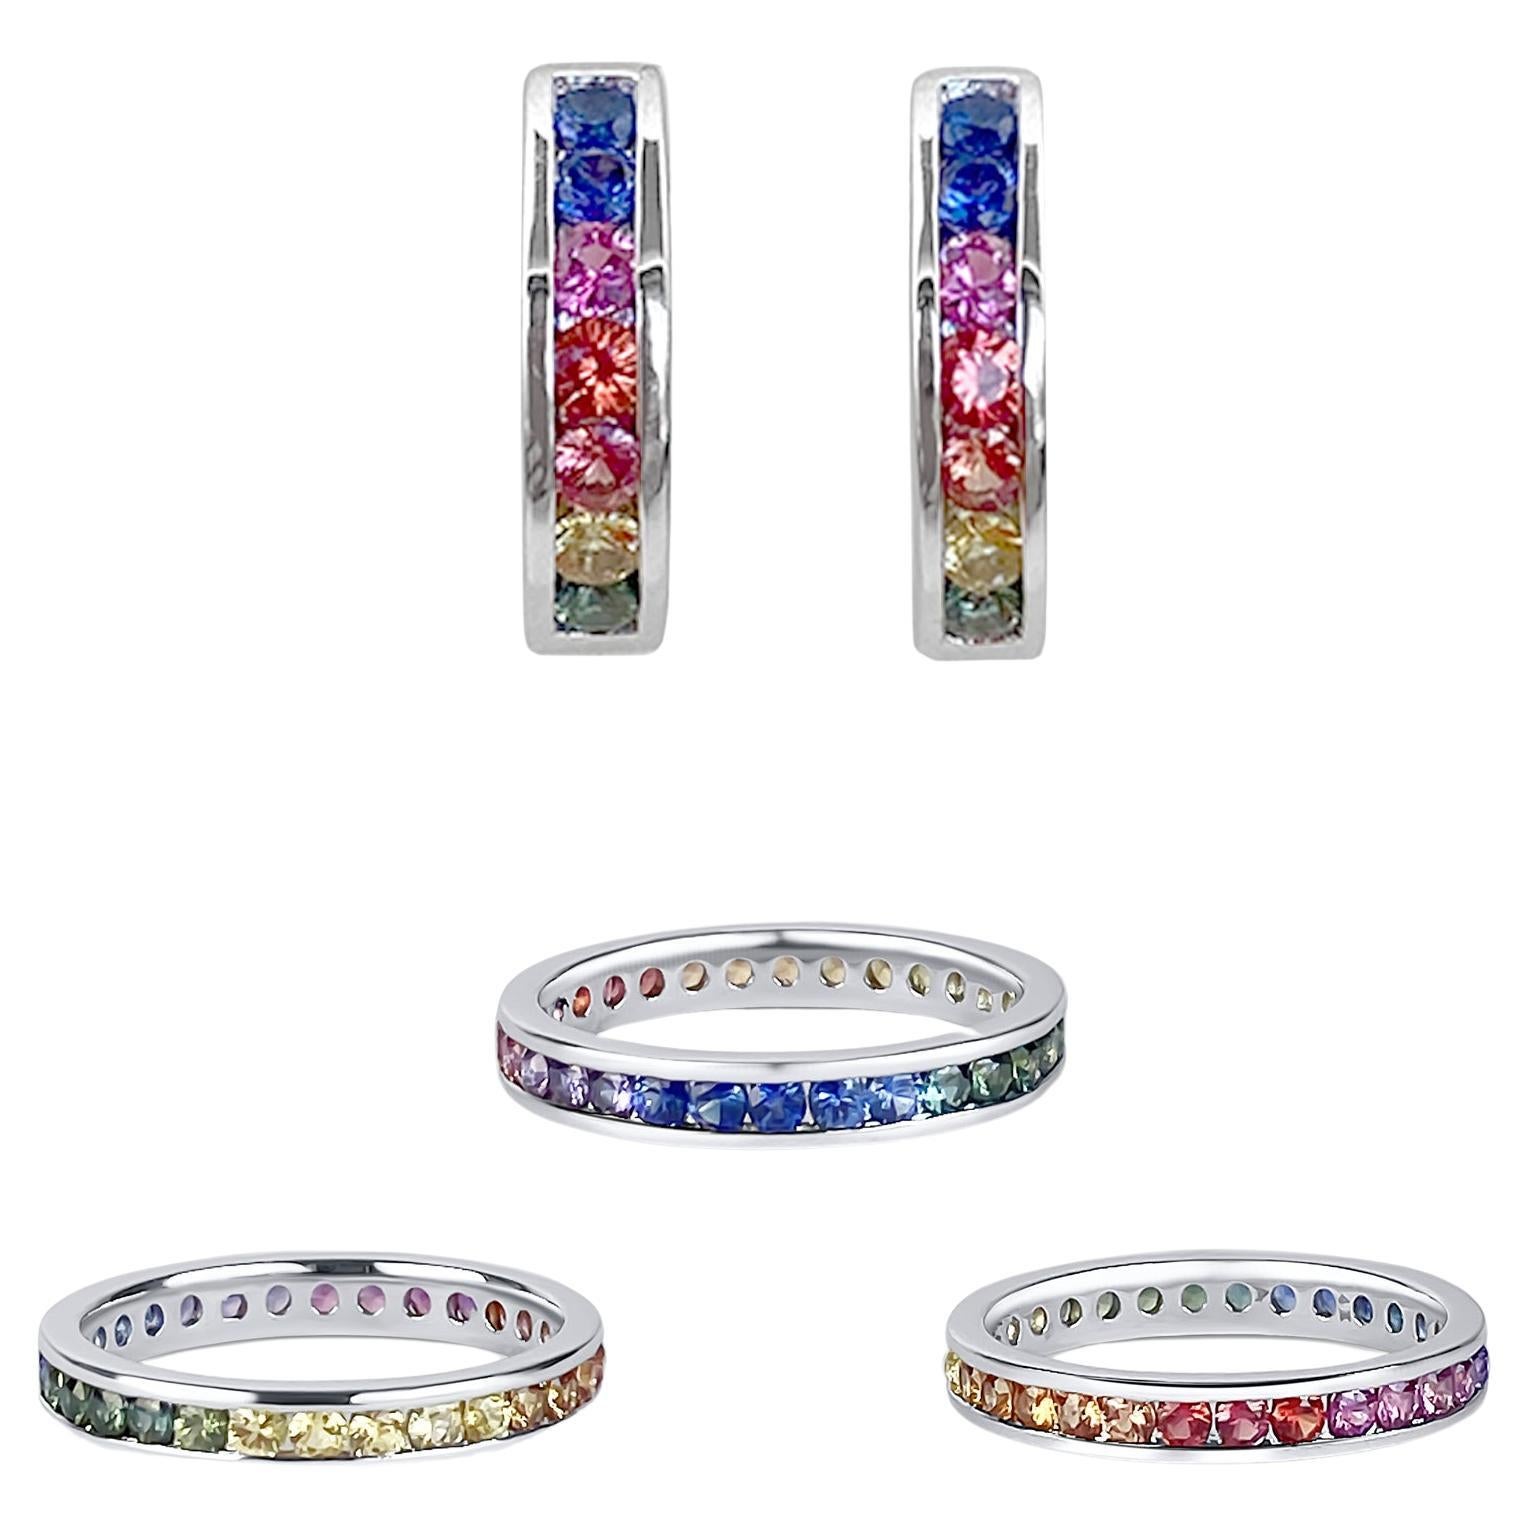 1.74 Carat Rainbow Color Natural Ceylon Sapphire Ring and Earrings Set 